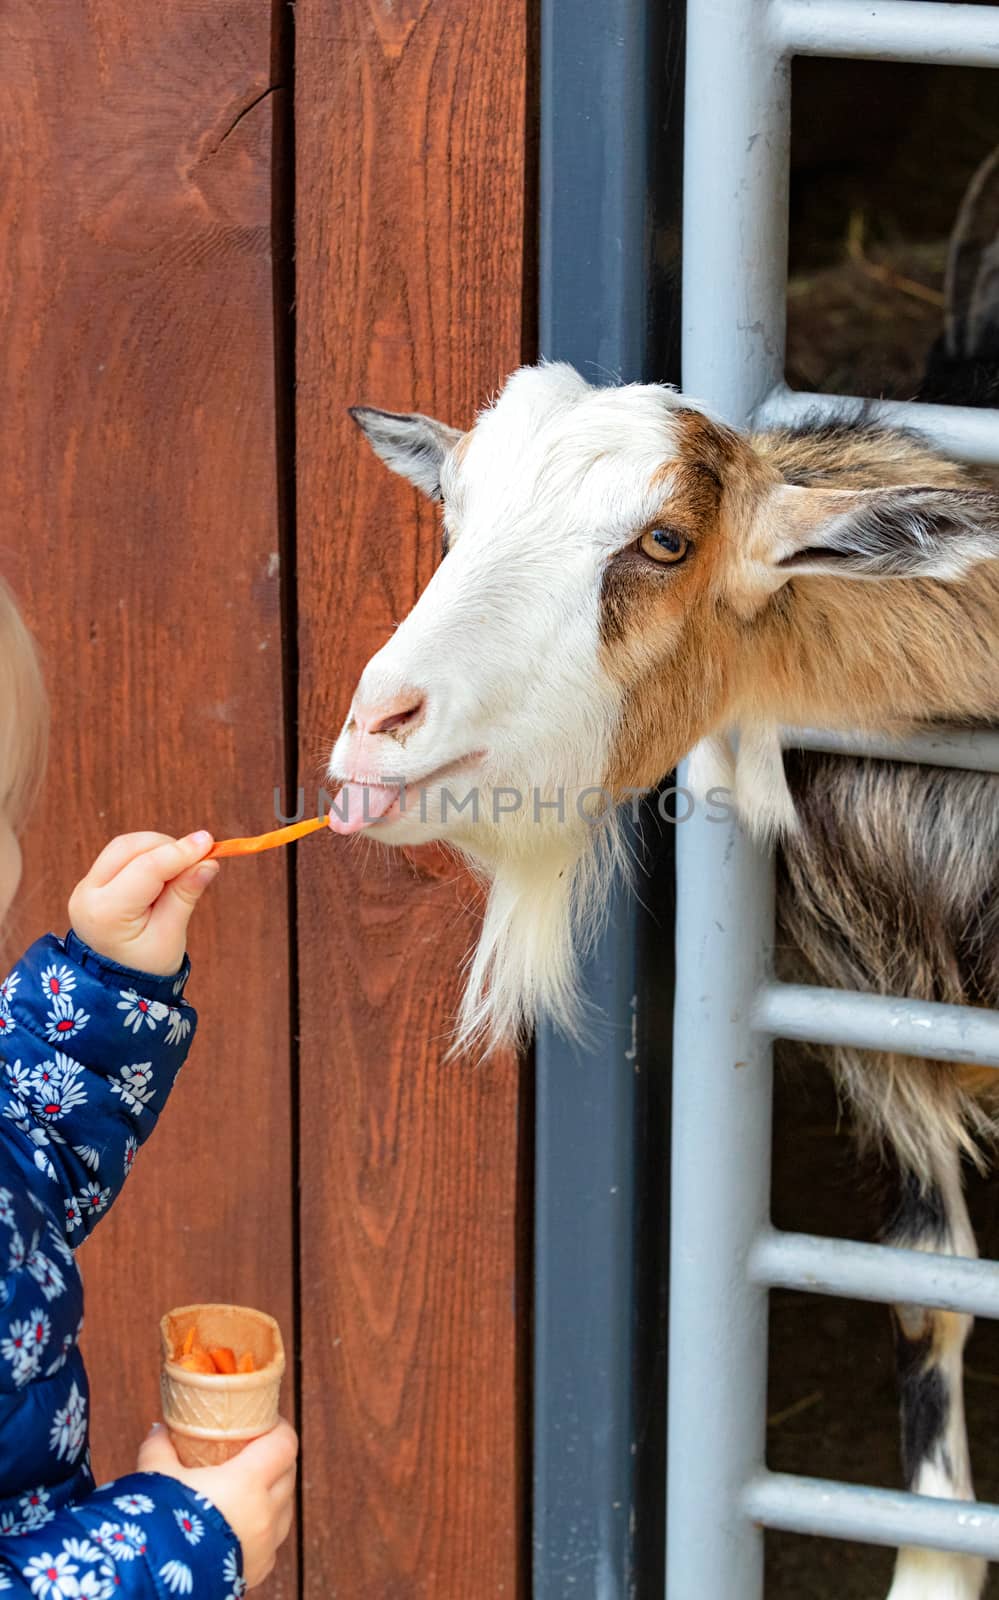 A little girl feeds a little kid who sticks his tongue out and cranes his neck from the stall to eat carrots from her hands, vertical image.